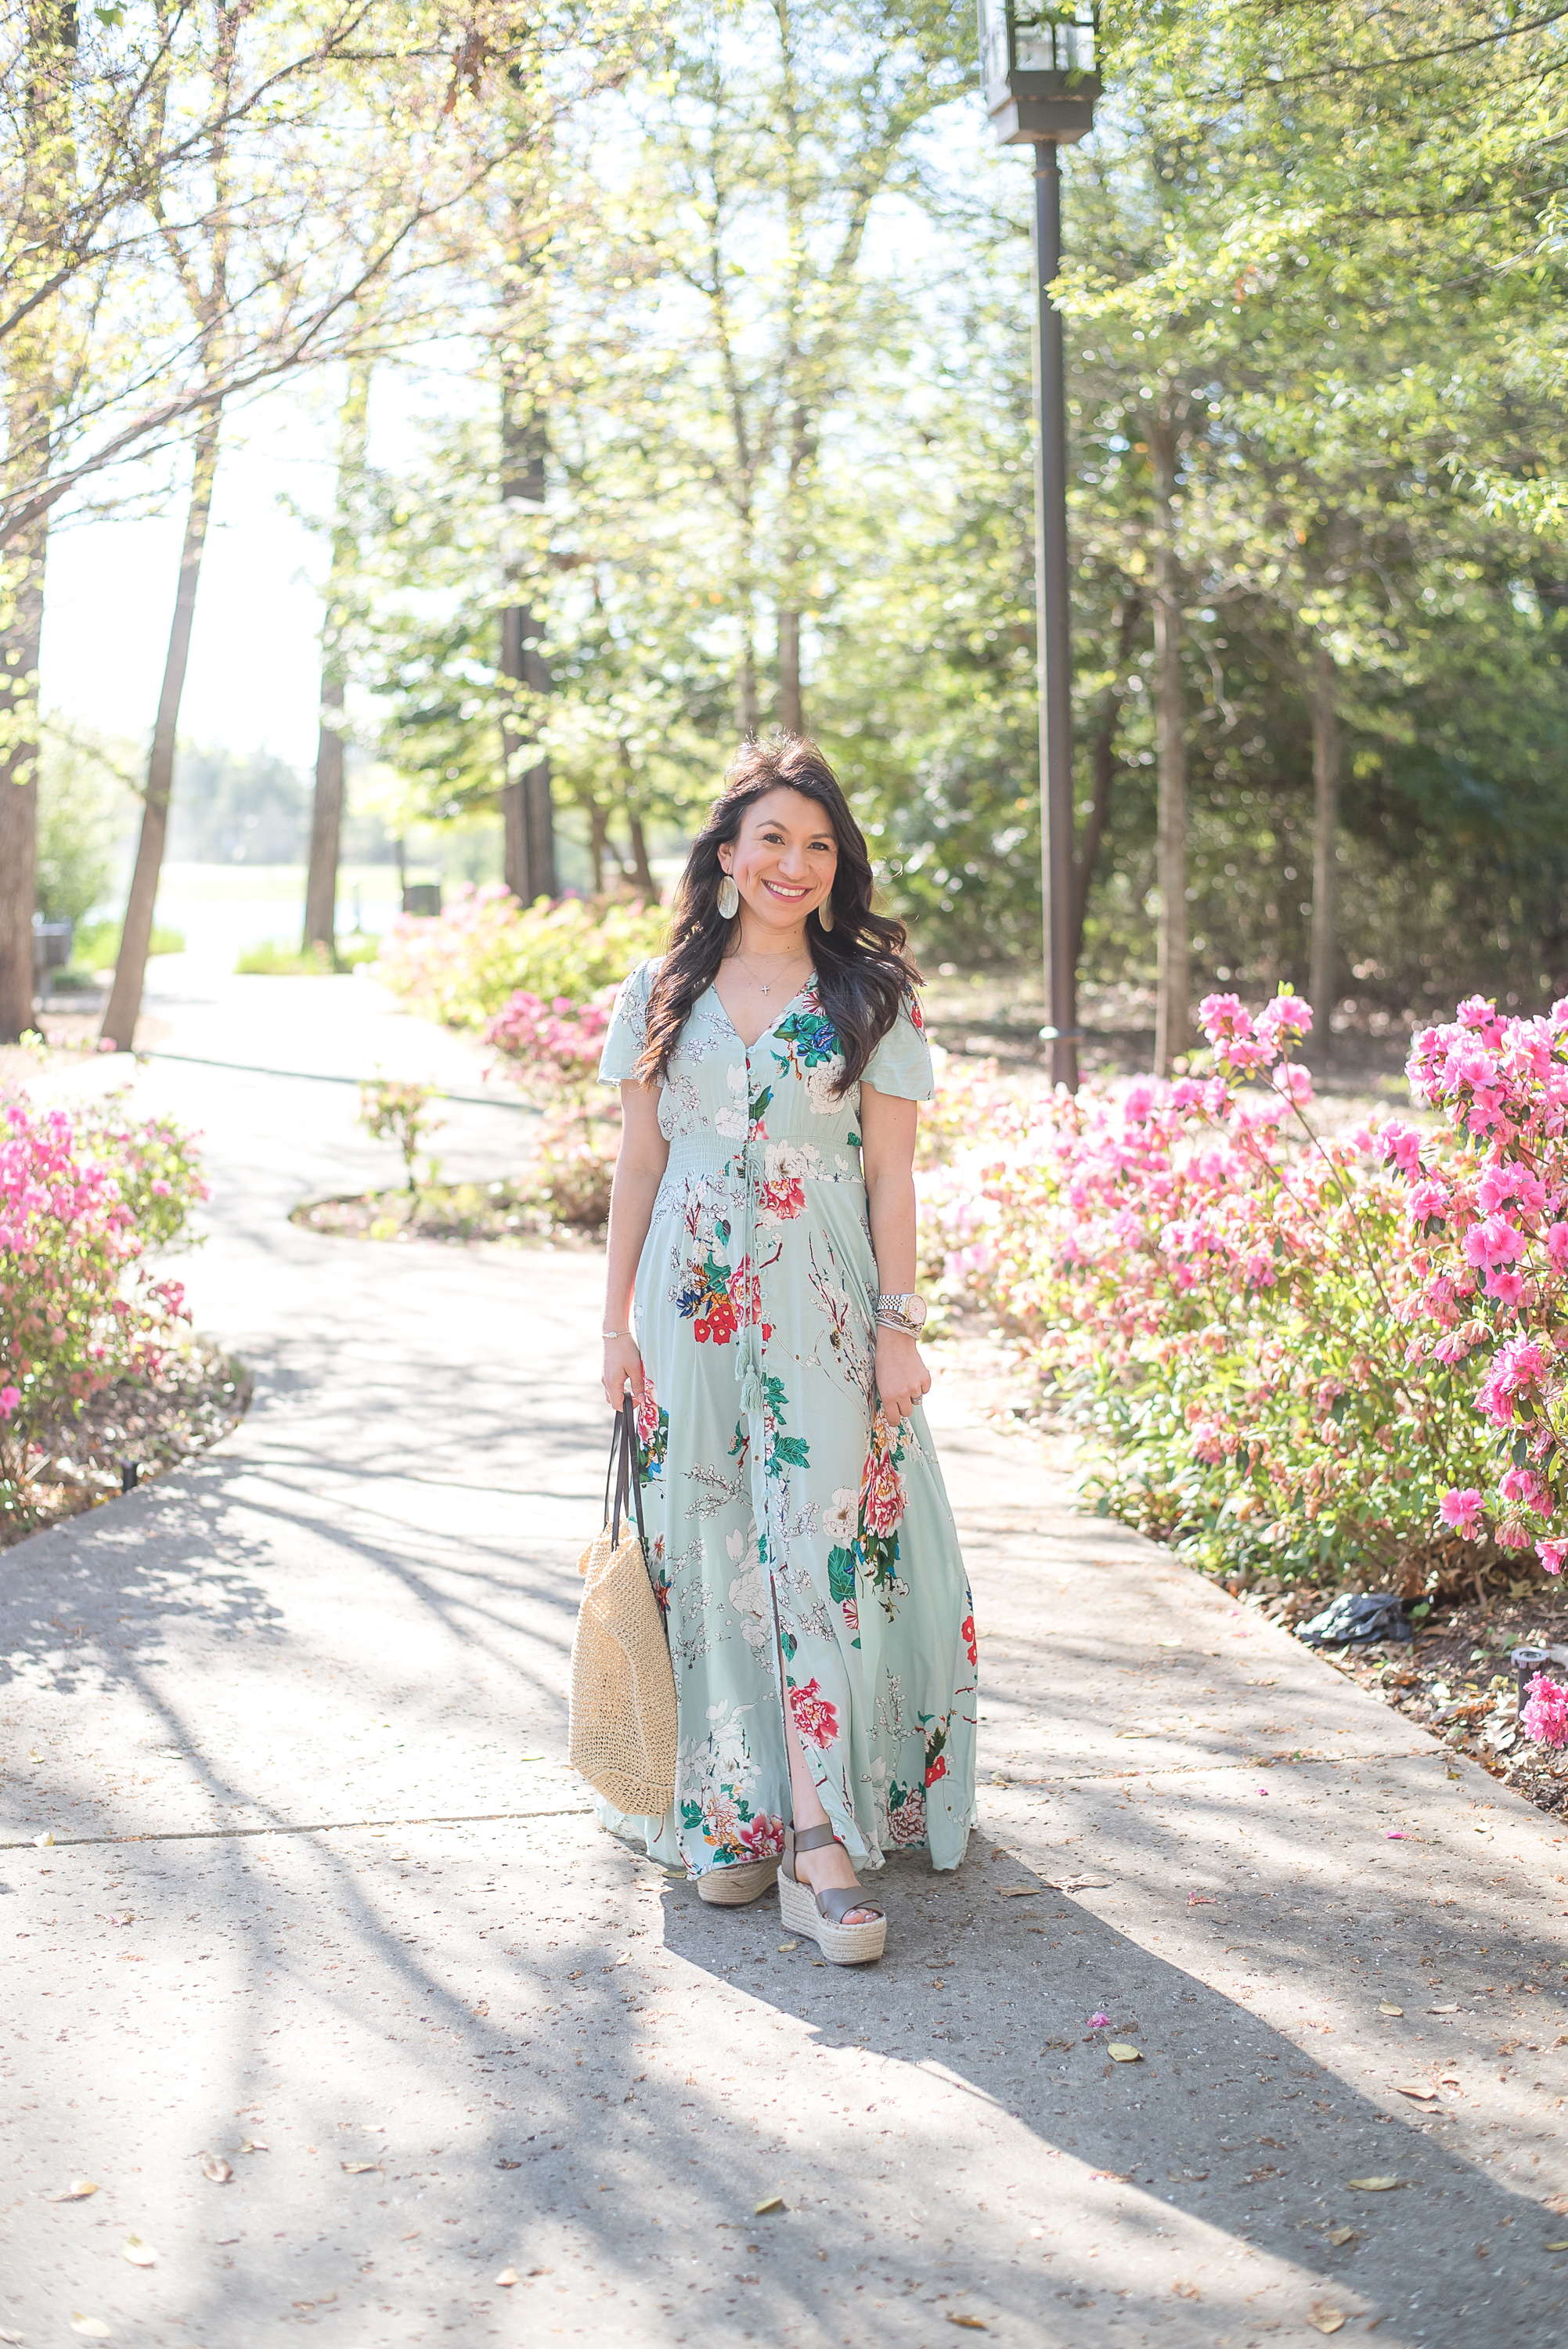 The best spring and summer dress under 30 dollars! #momstyle #fashioninspo #dress #springdresses #fashionchallenge #style challenge Photo by Tiffany Harston Photography - Atascocita family photographer, Eagle Springs photographer